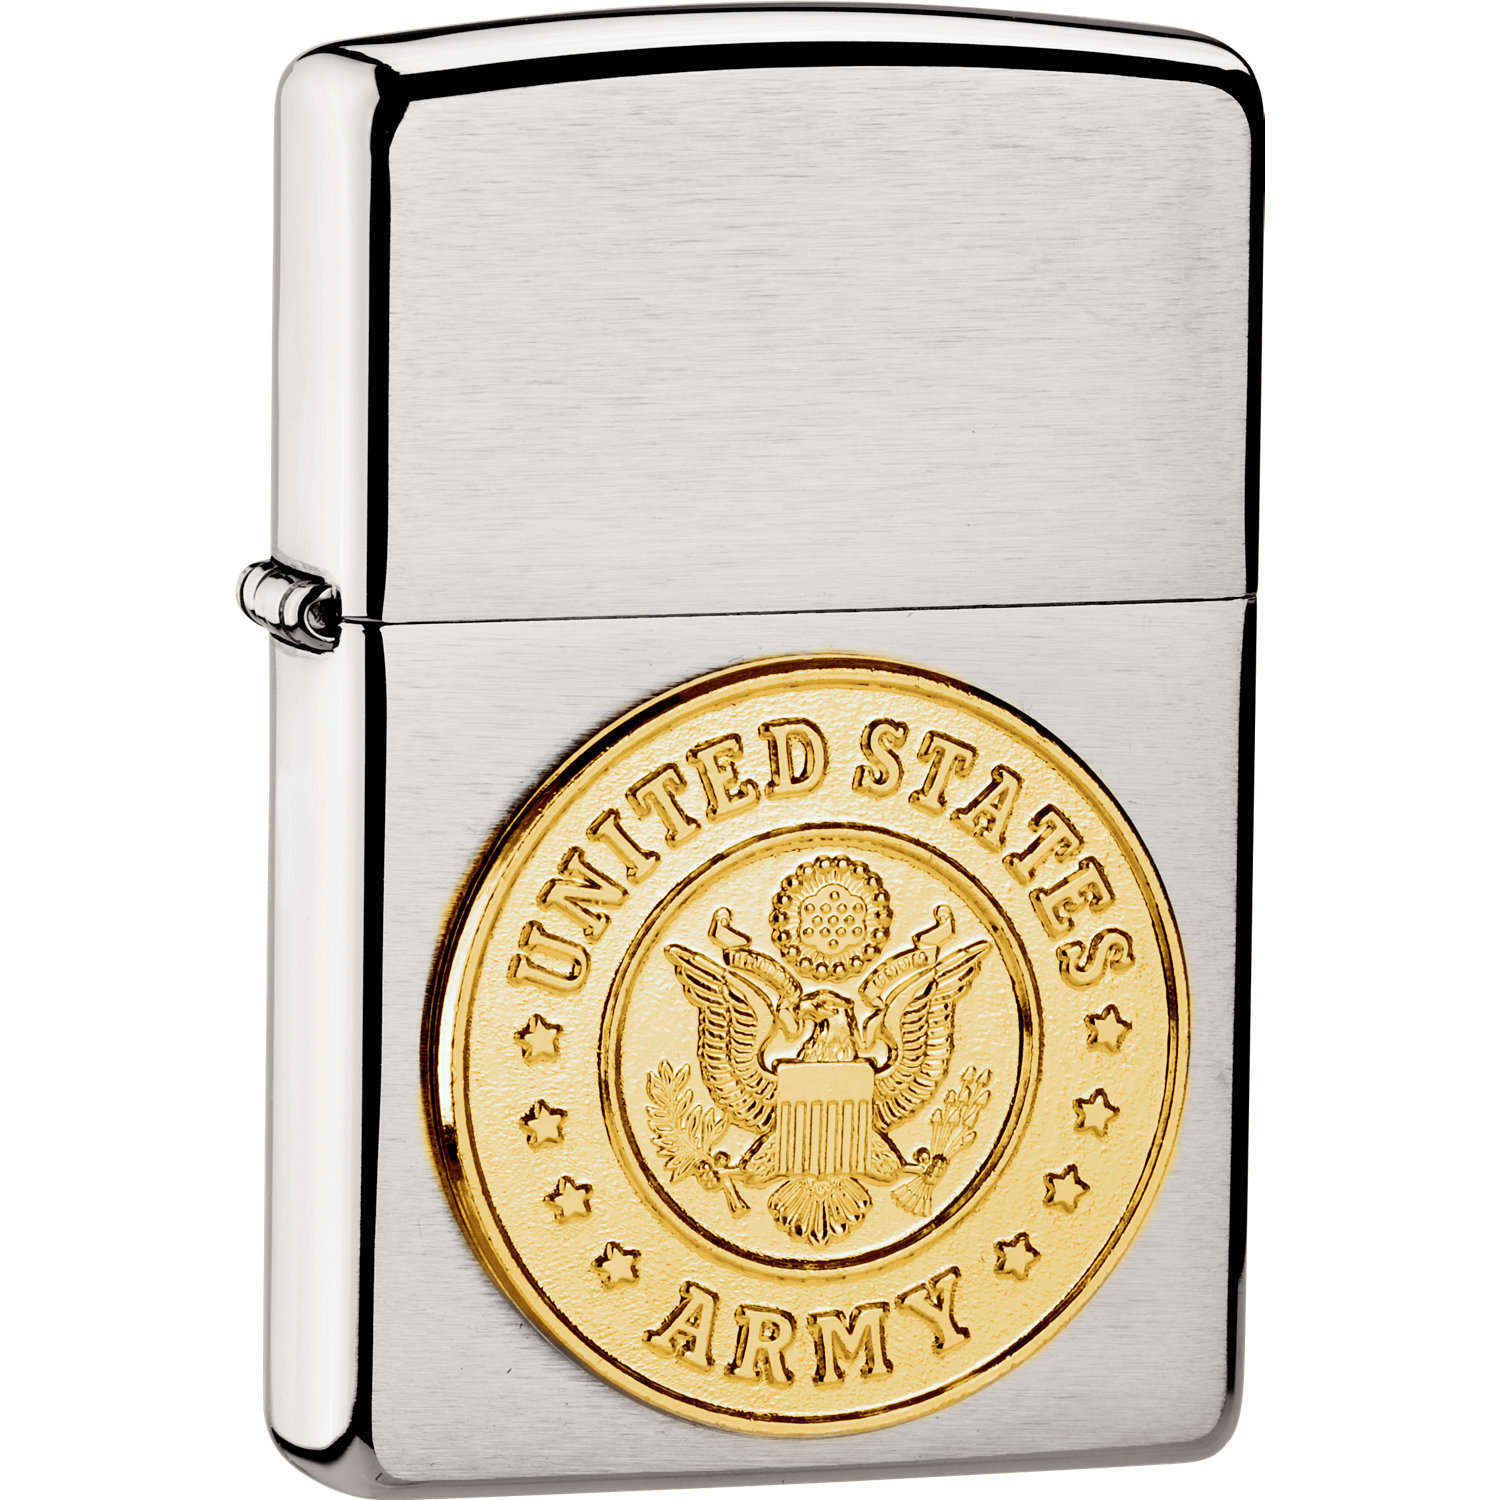 U.S. Army Zippo lighter with a gorgeous gold-tone U.S. Army emblem on the brushed chrome lighter; made in the USA.